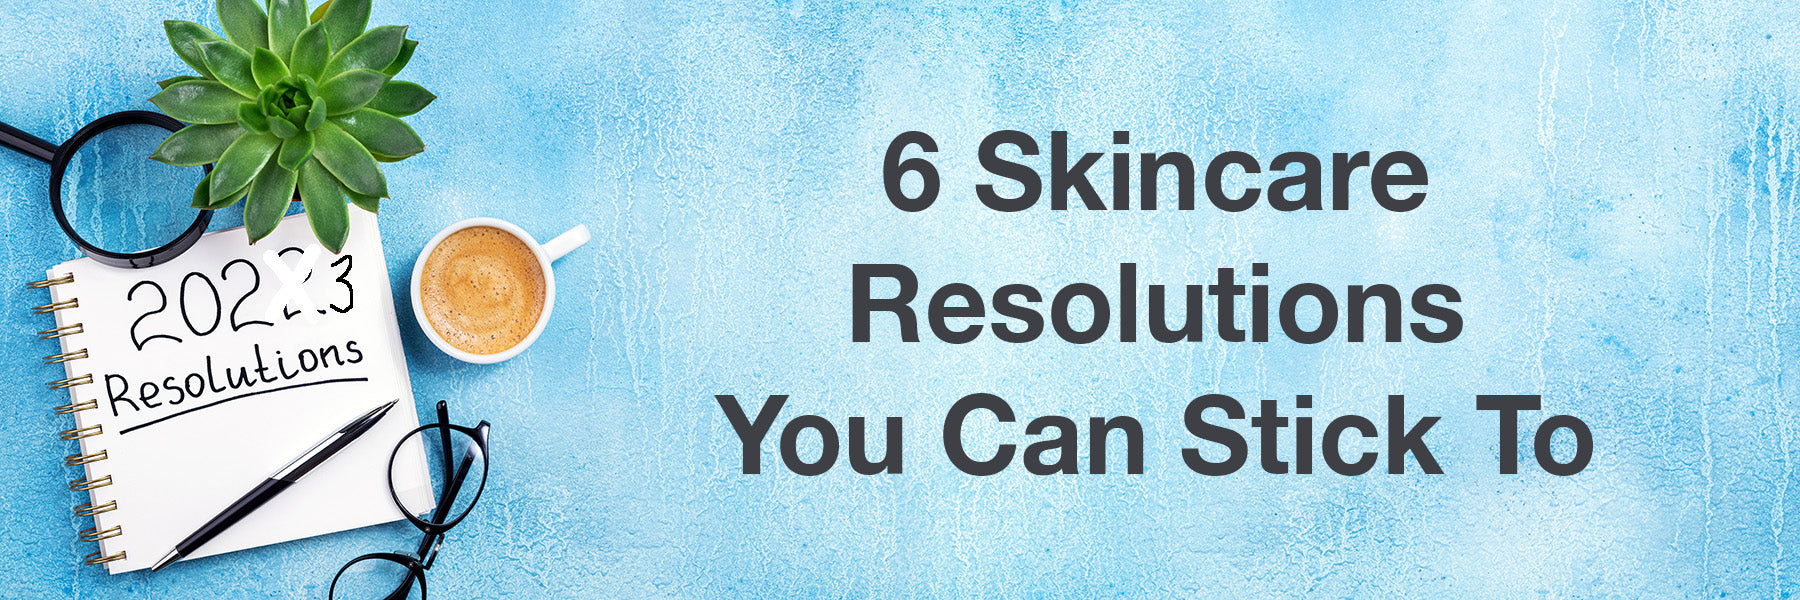 6 Skincare Resolutions You Can Stick To